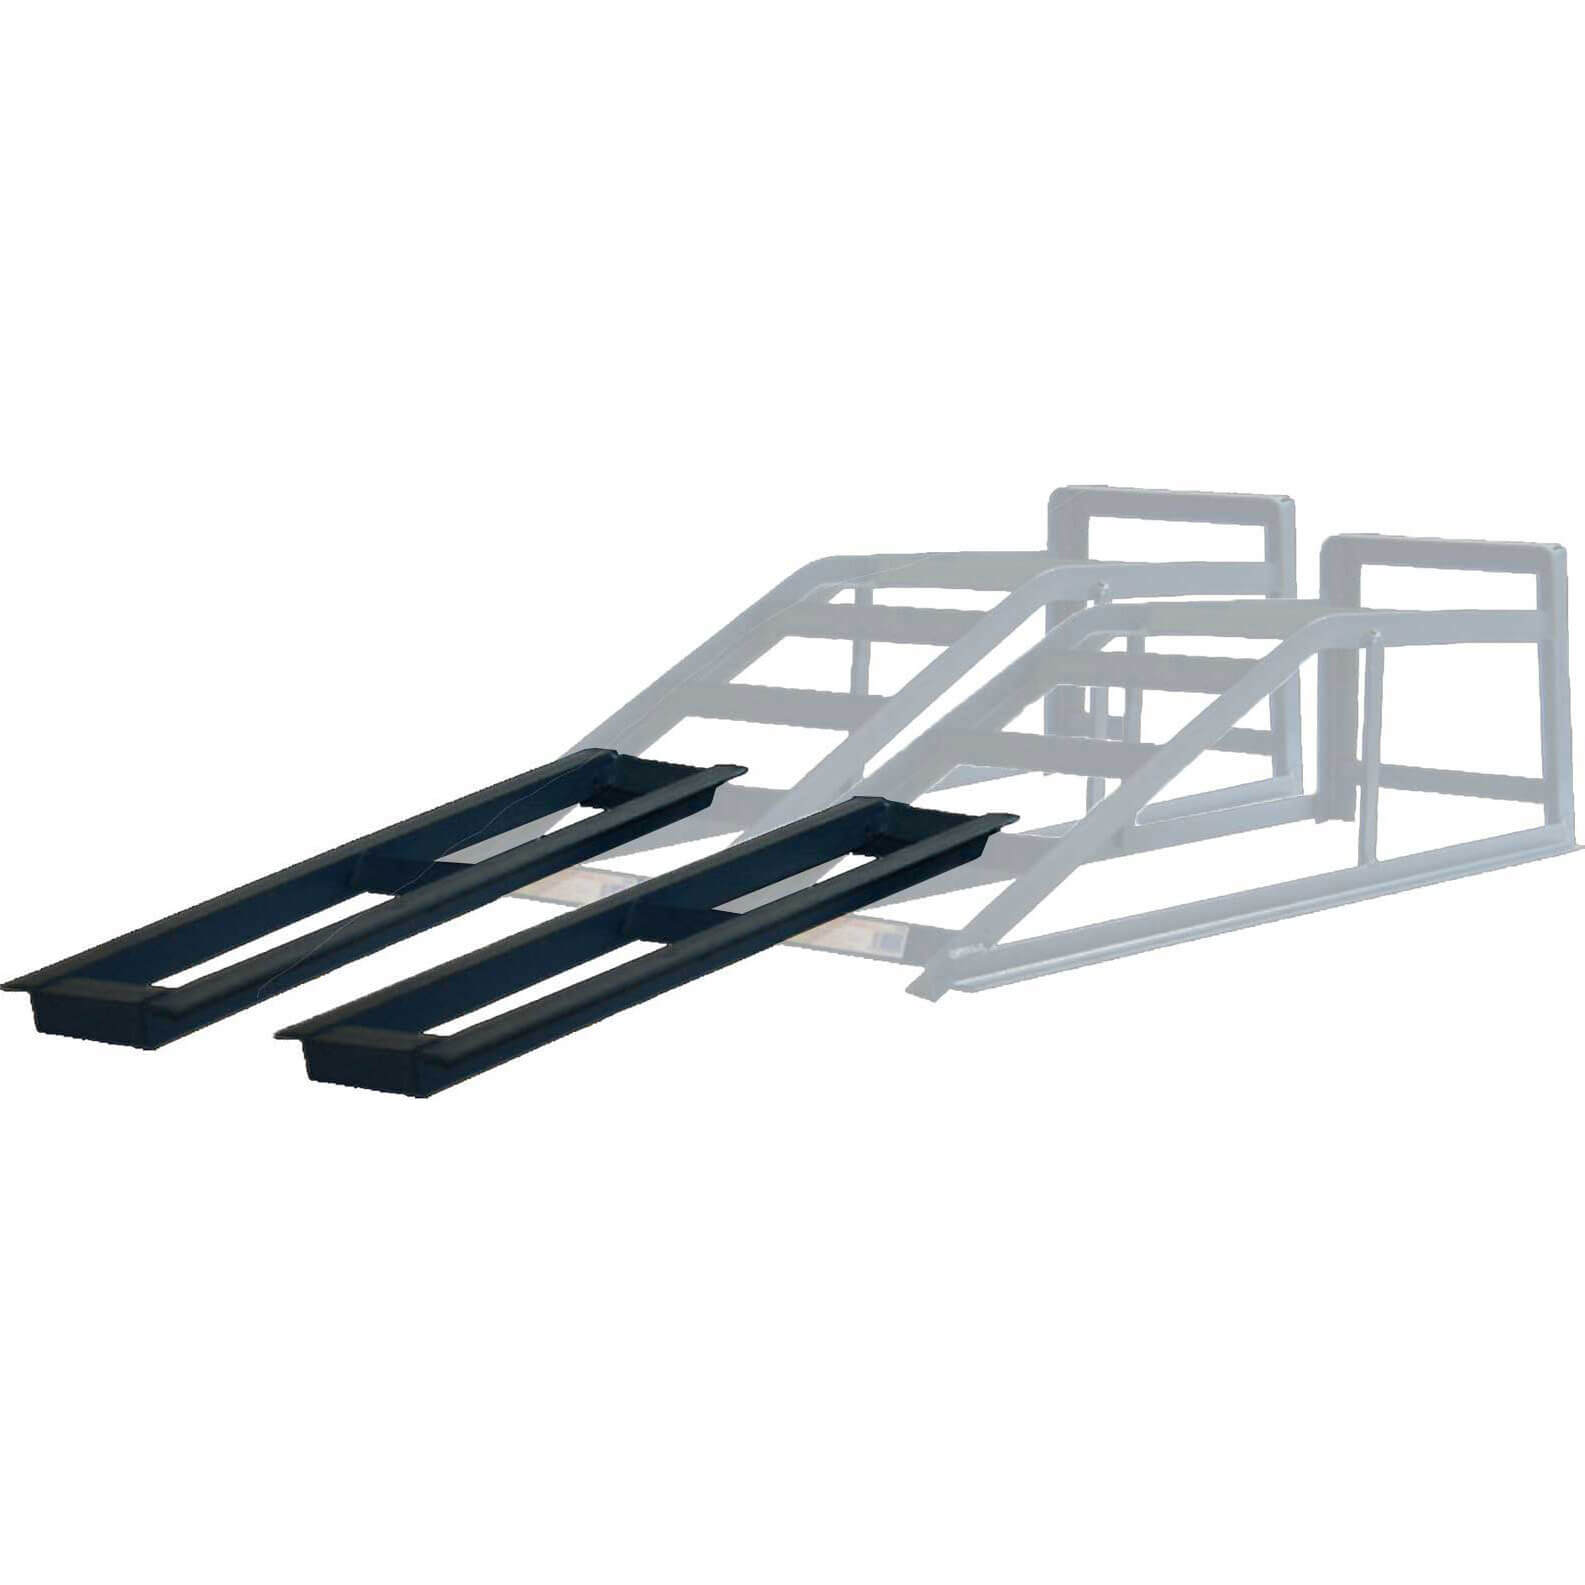 Image of Sirius Car Ramps Pair Extension Only for Low Ground Clearance Cars